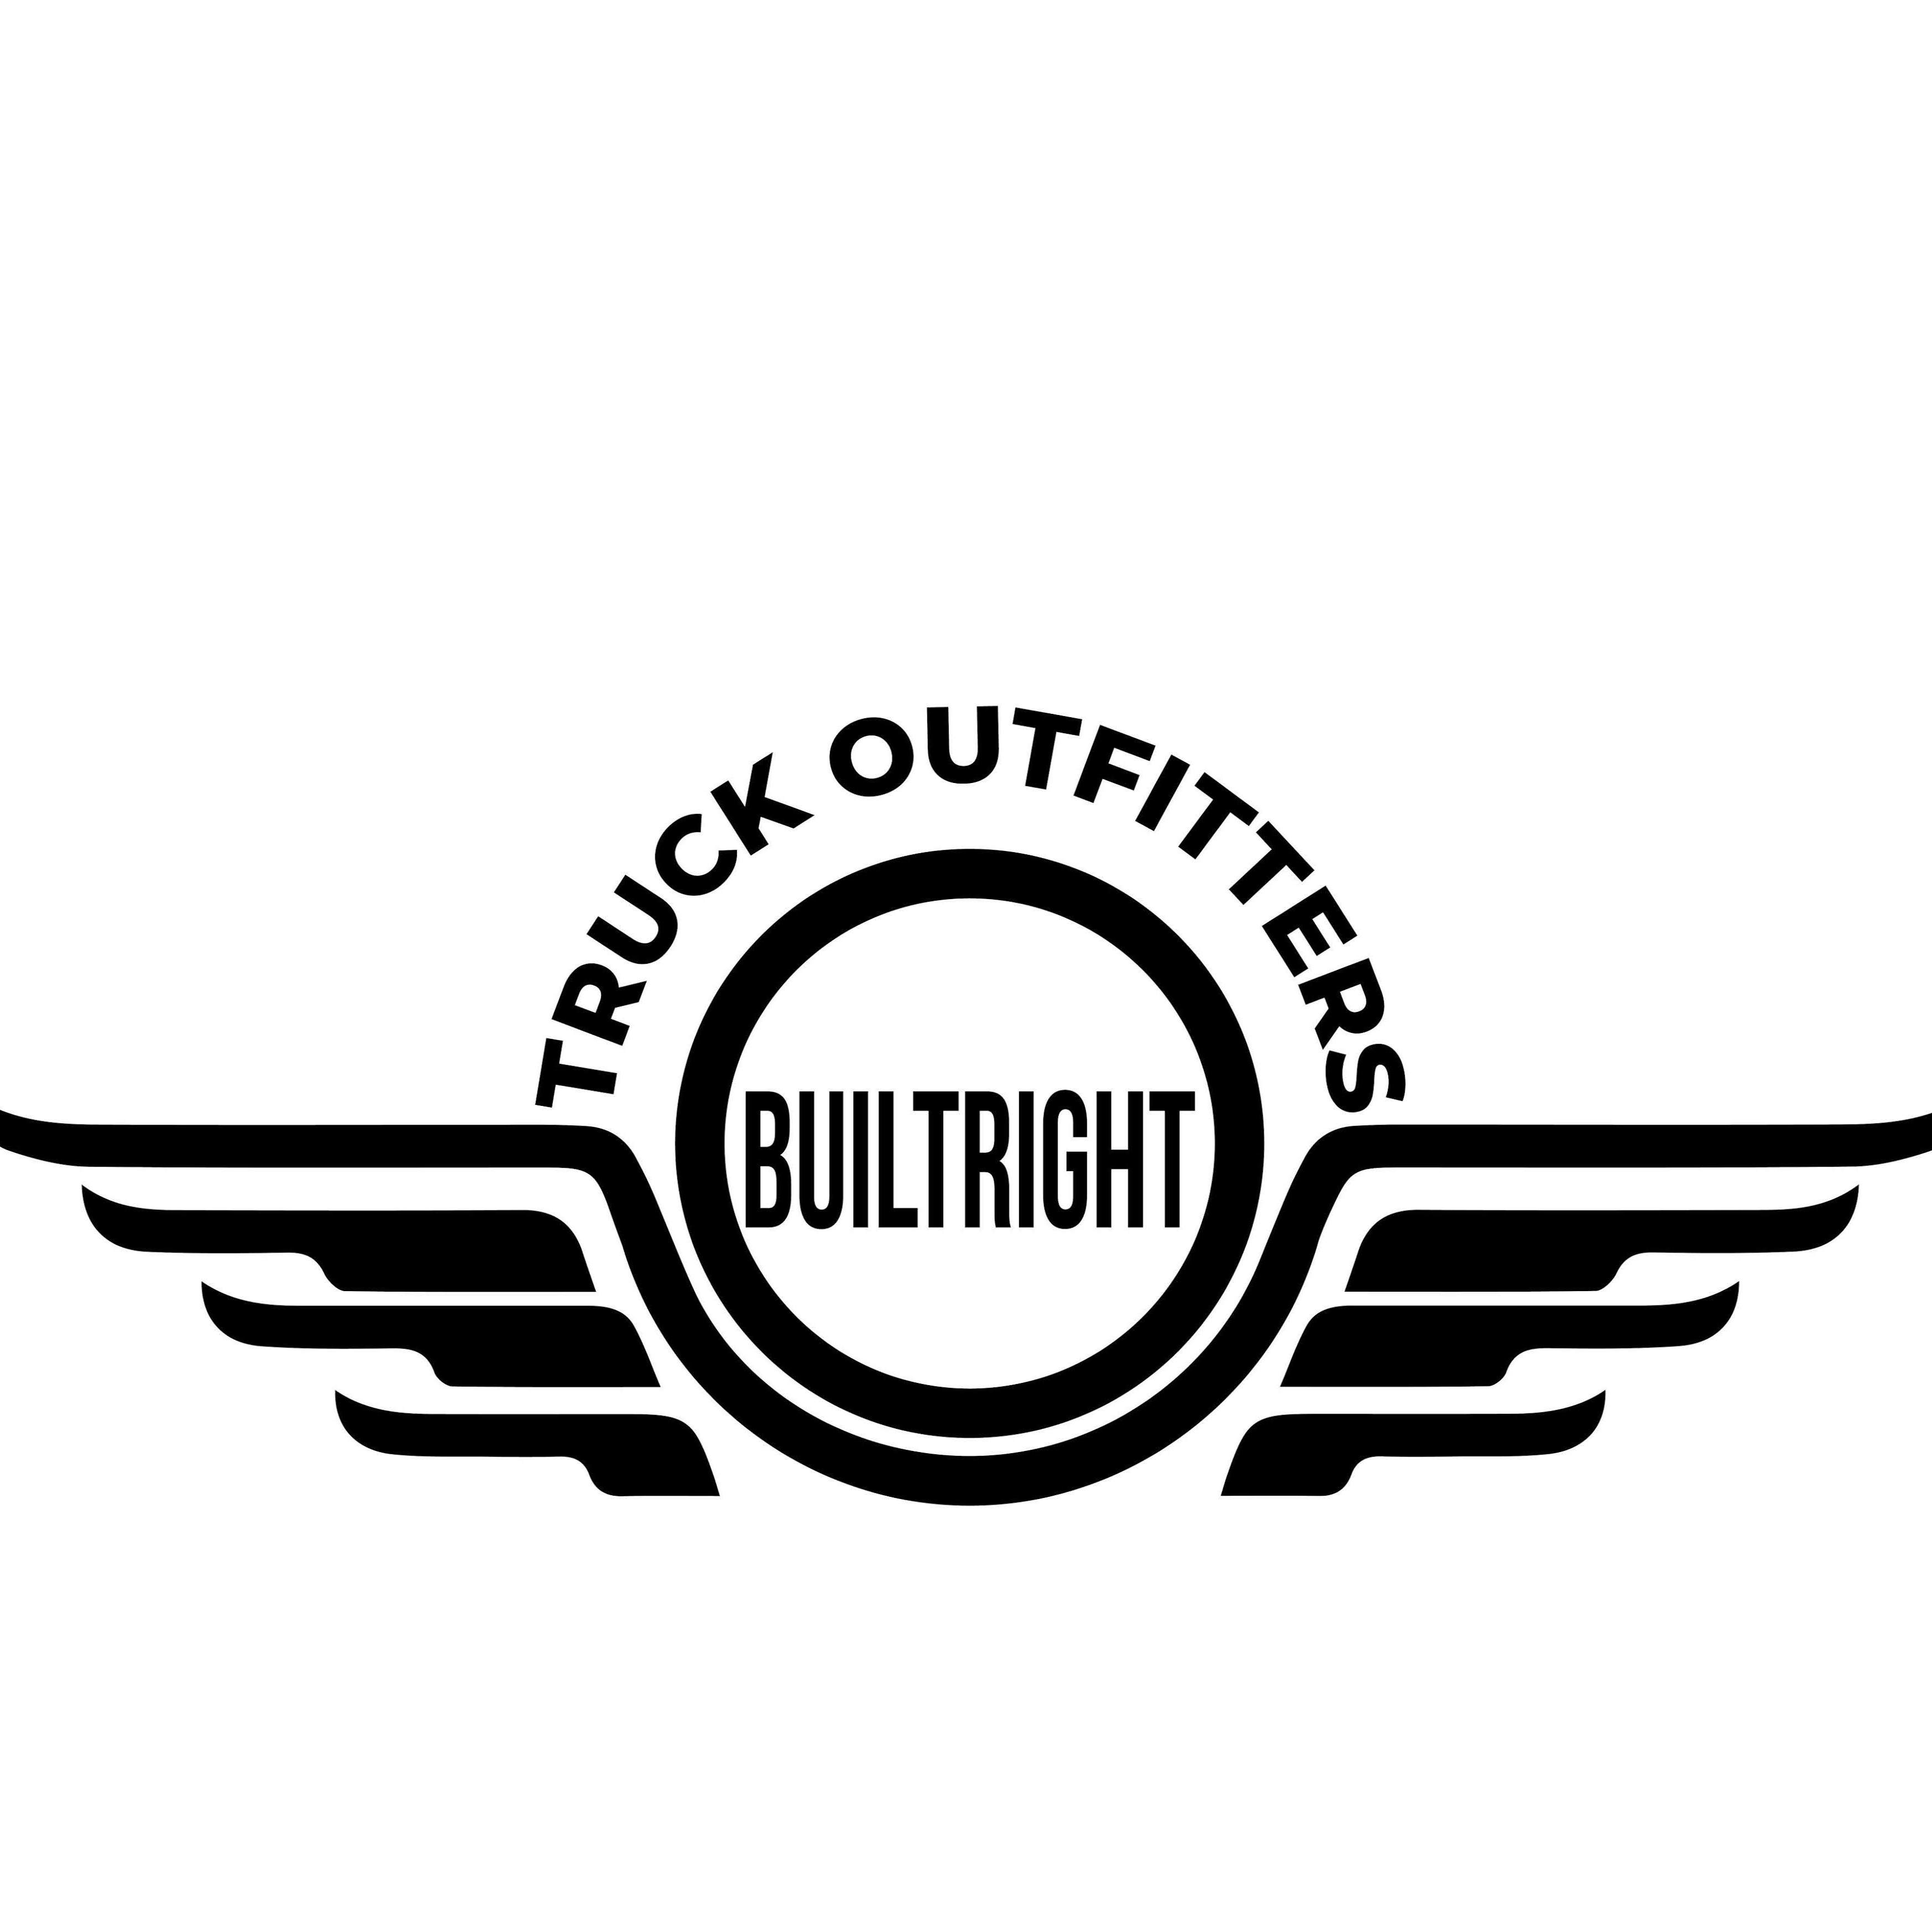 Builtright Truck Outfitters review